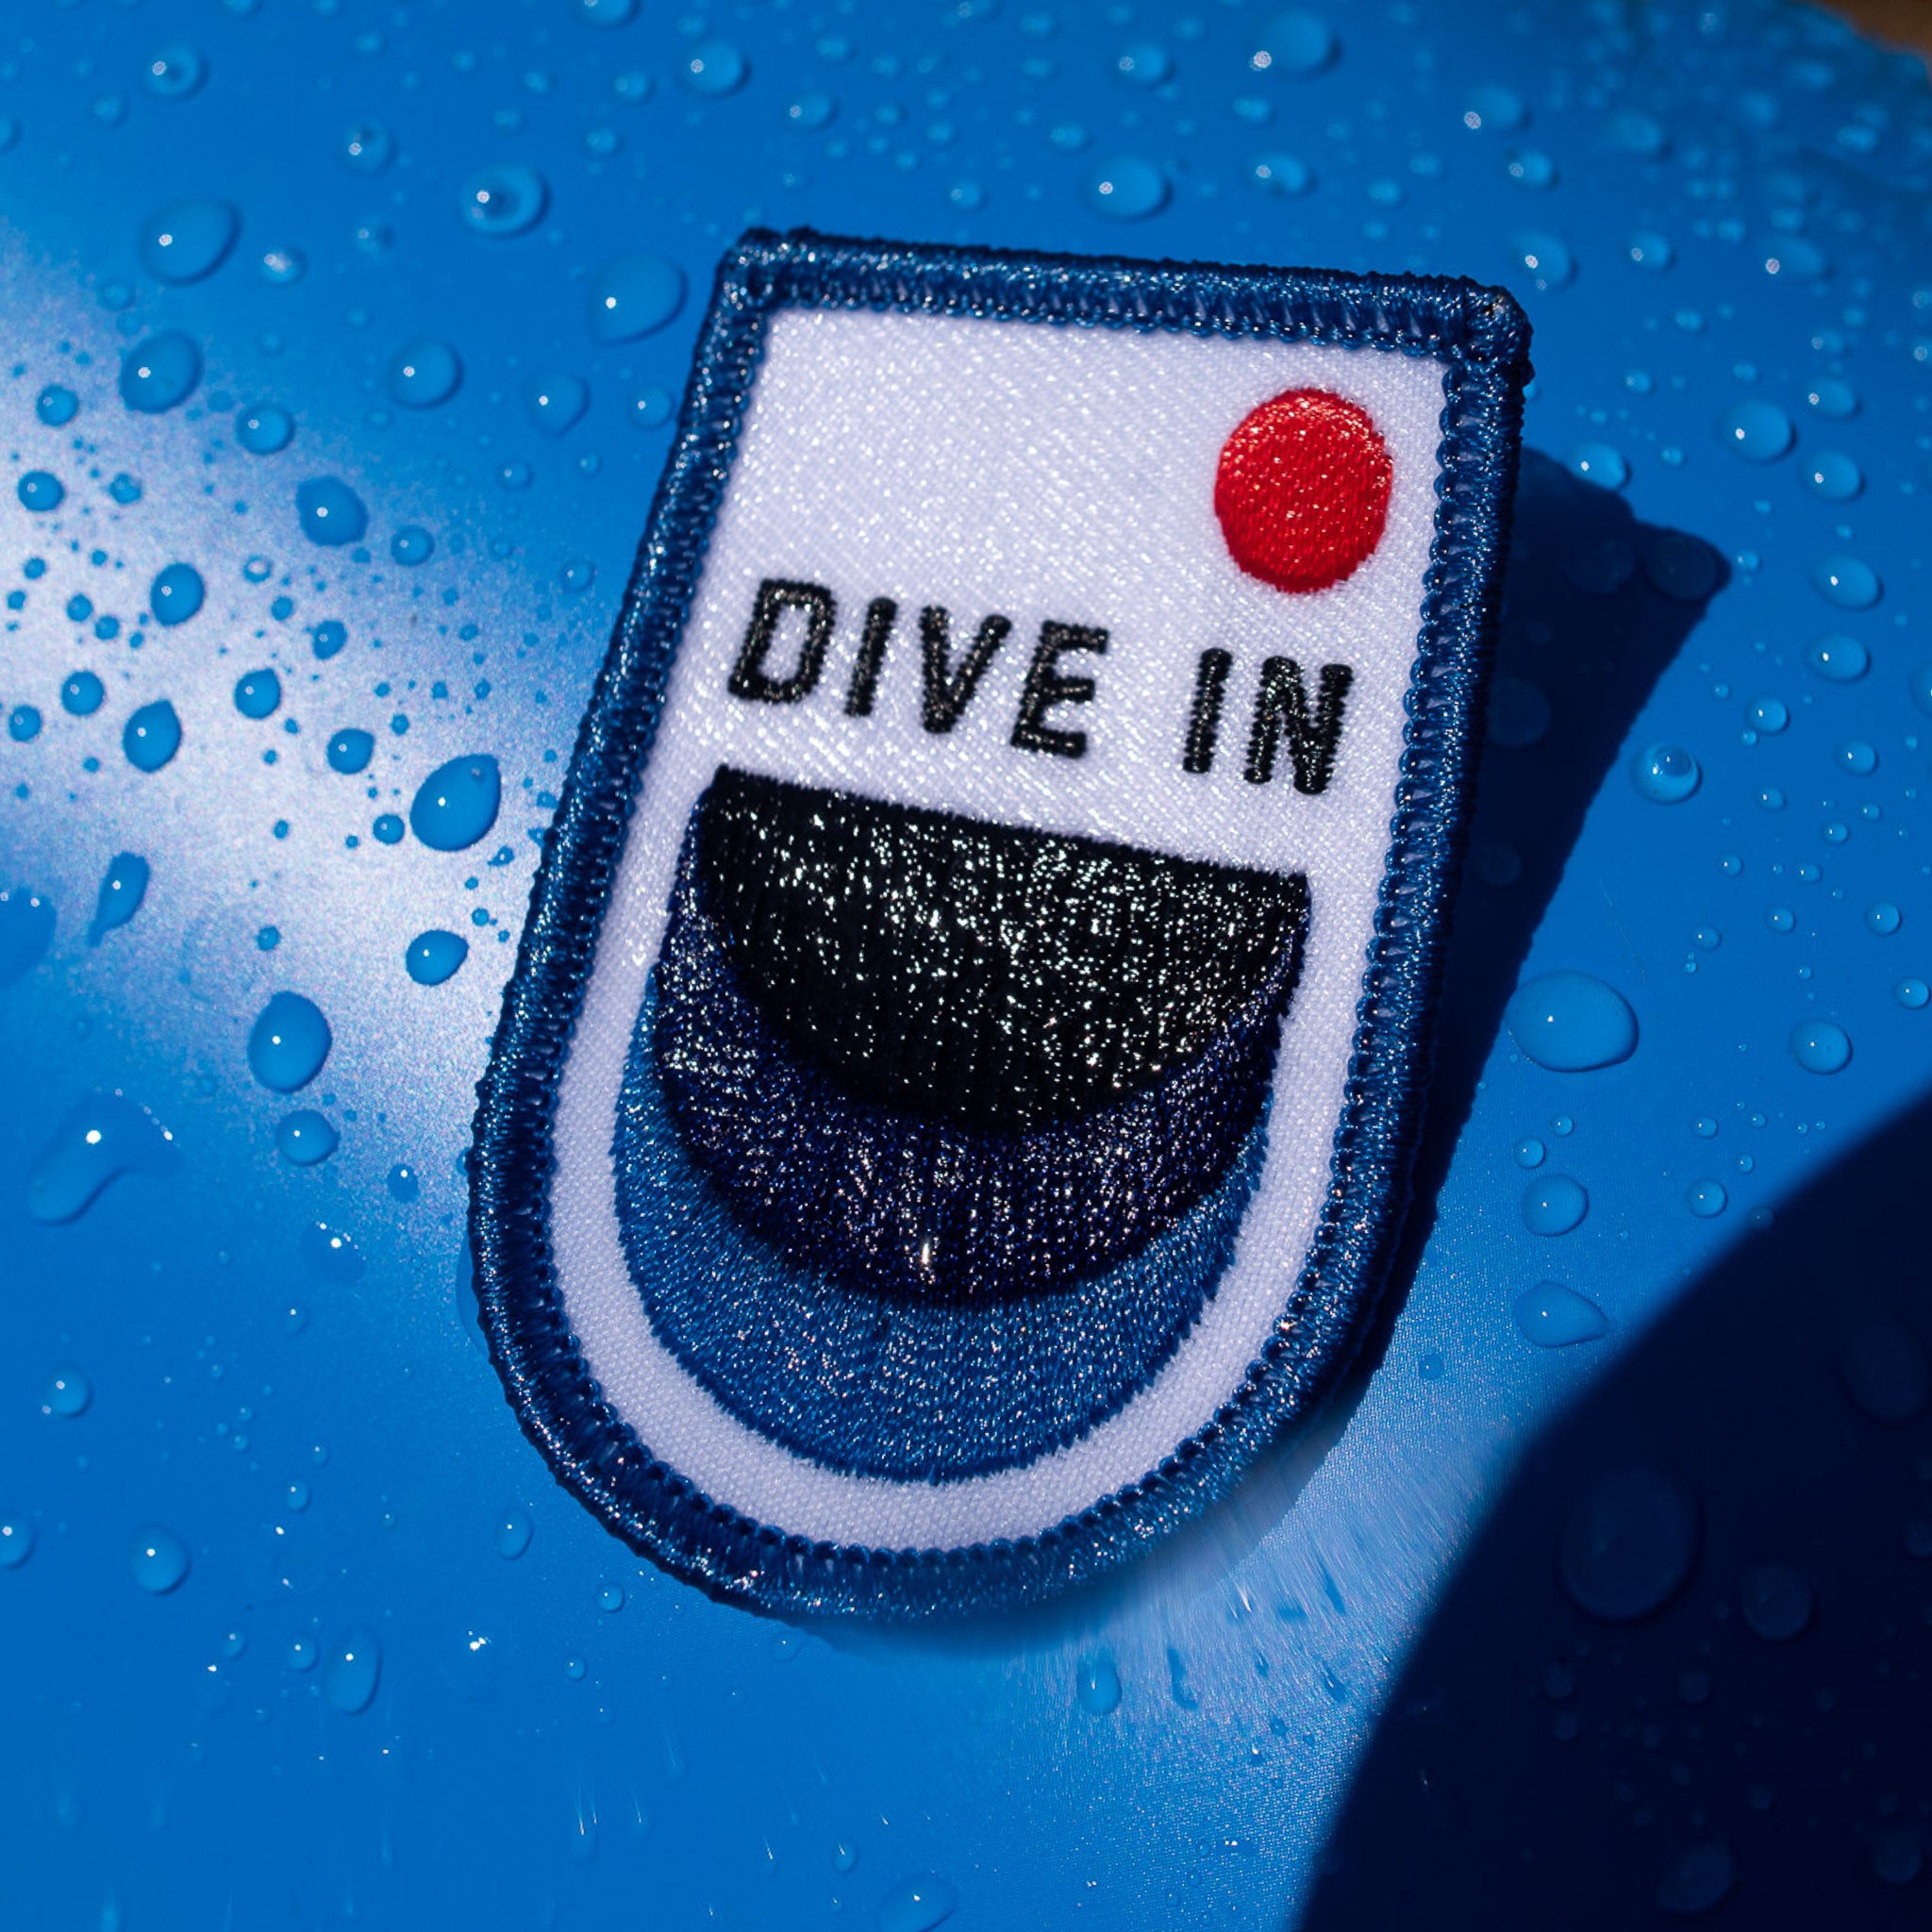 Merch: DIVE IN Patches